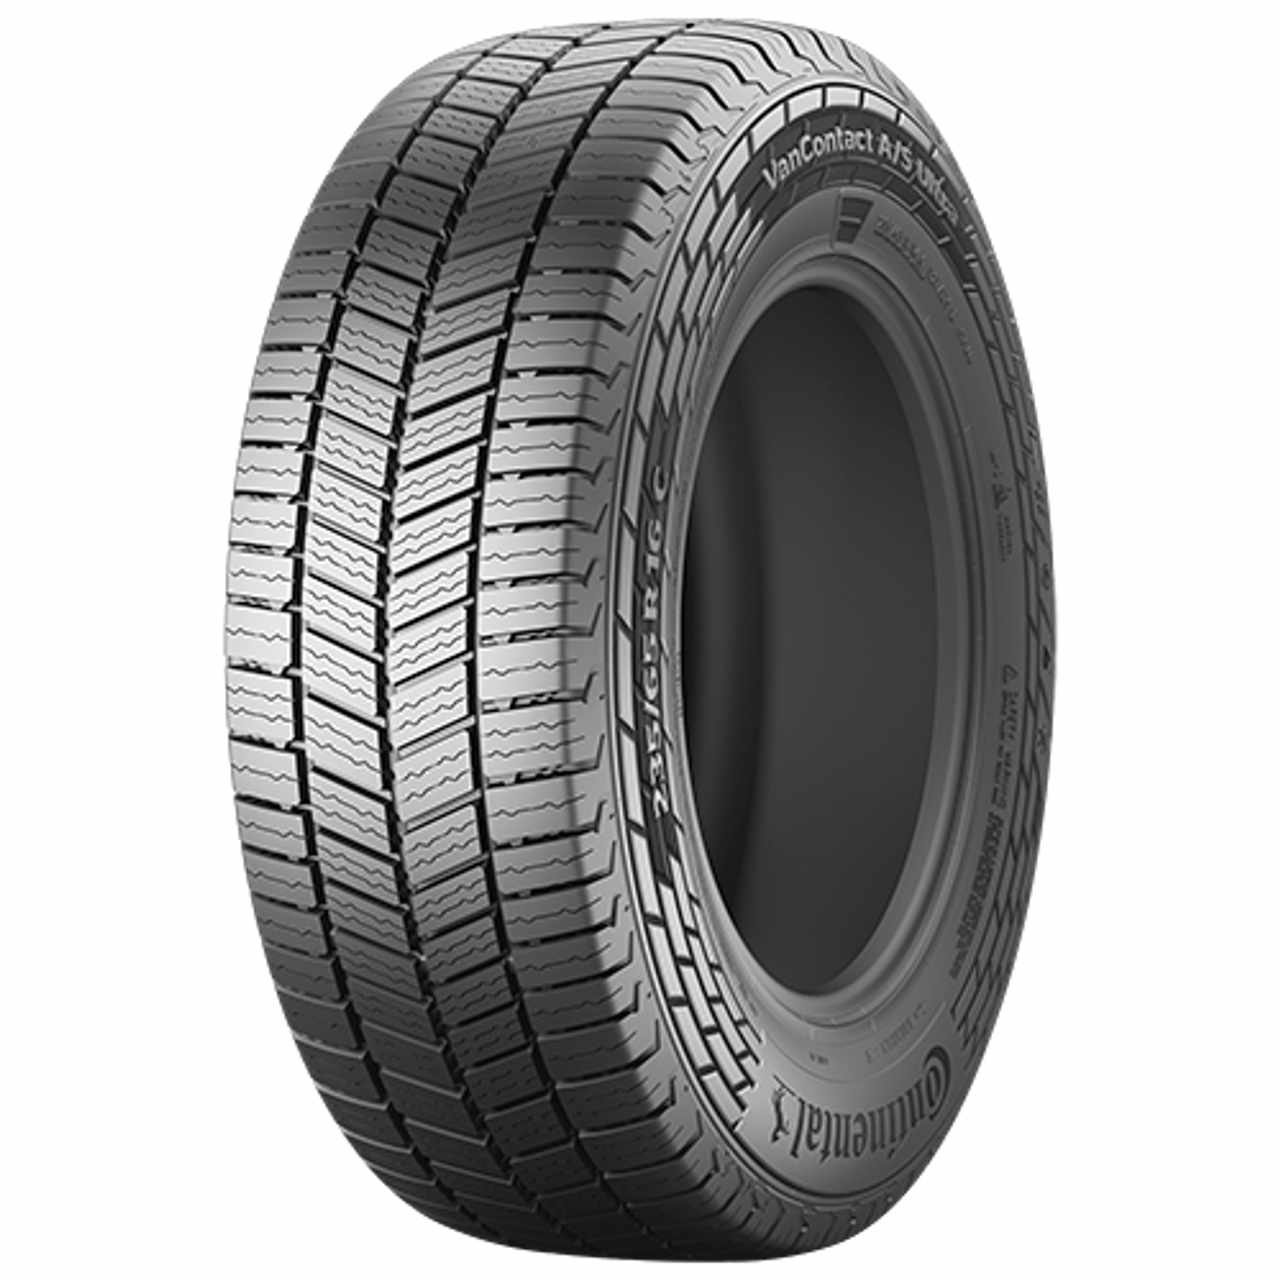 CONTINENTAL VANCONTACT A/S ULTRA 195/65R15C 98T BSW